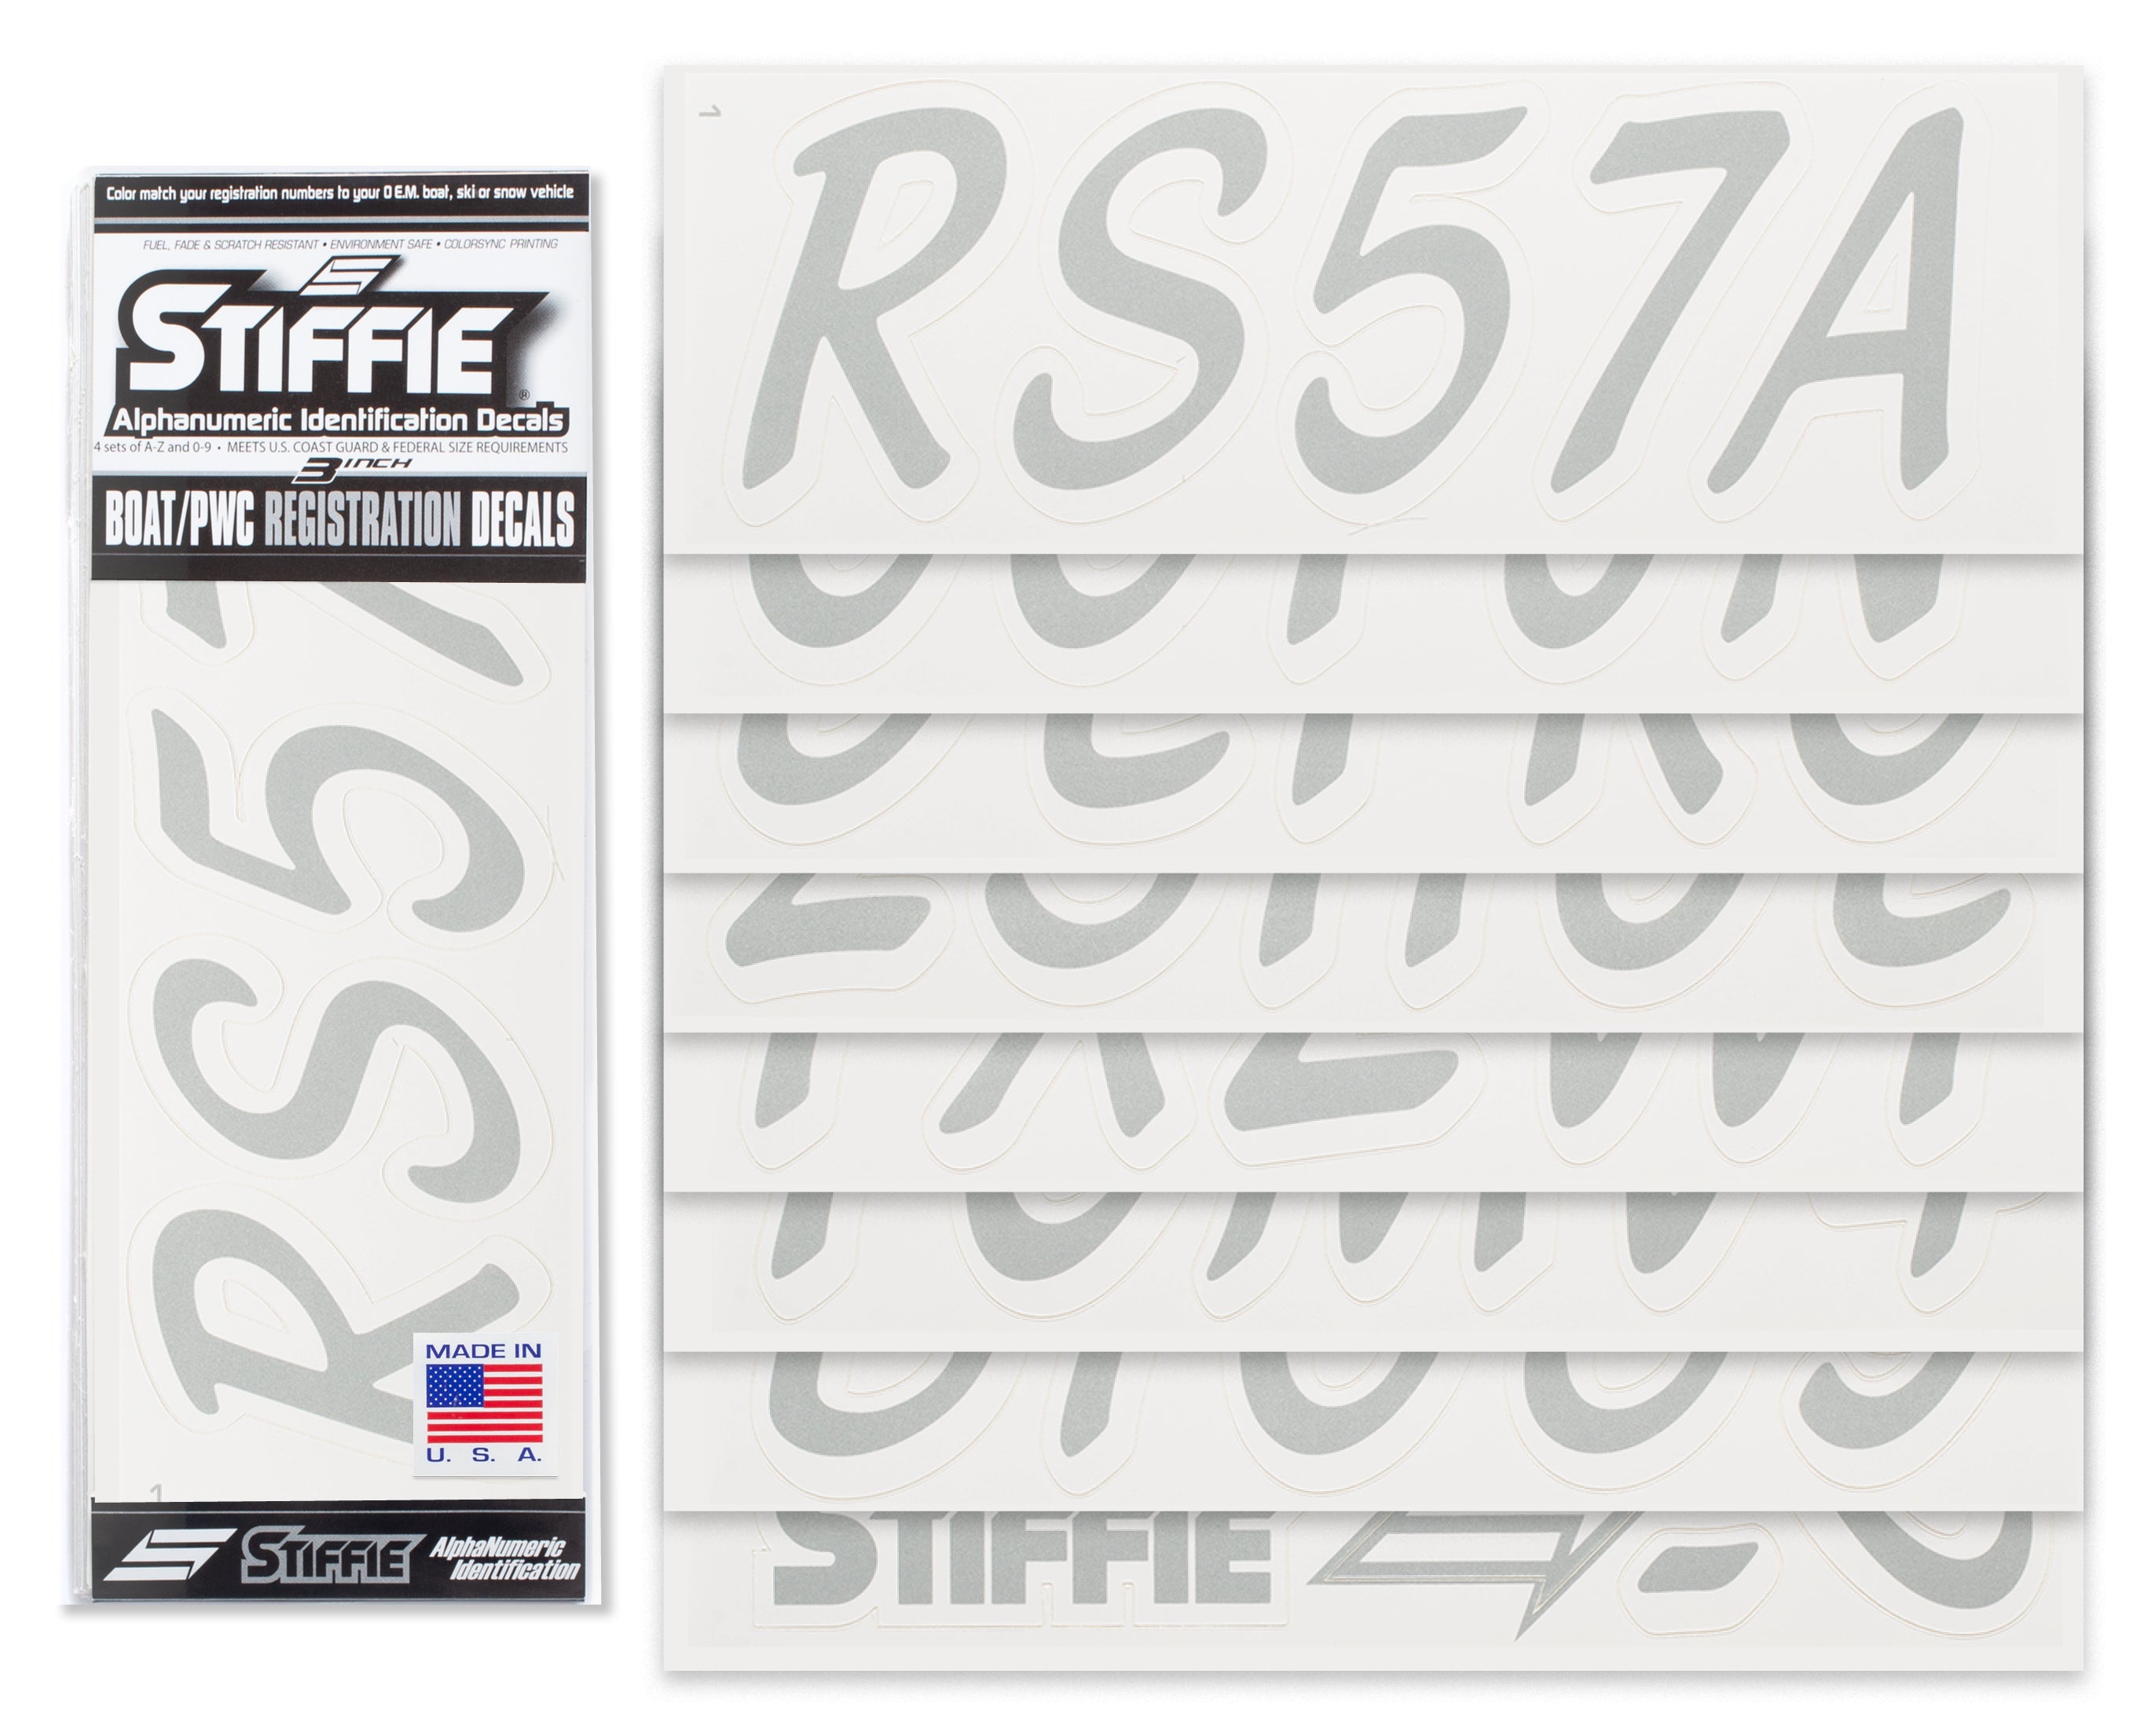 STIFFIE Whipline Solid Metallic Silver/White 3" Alpha-Numeric Registration Identification Numbers Stickers Decals for Boats & Personal Watercraft